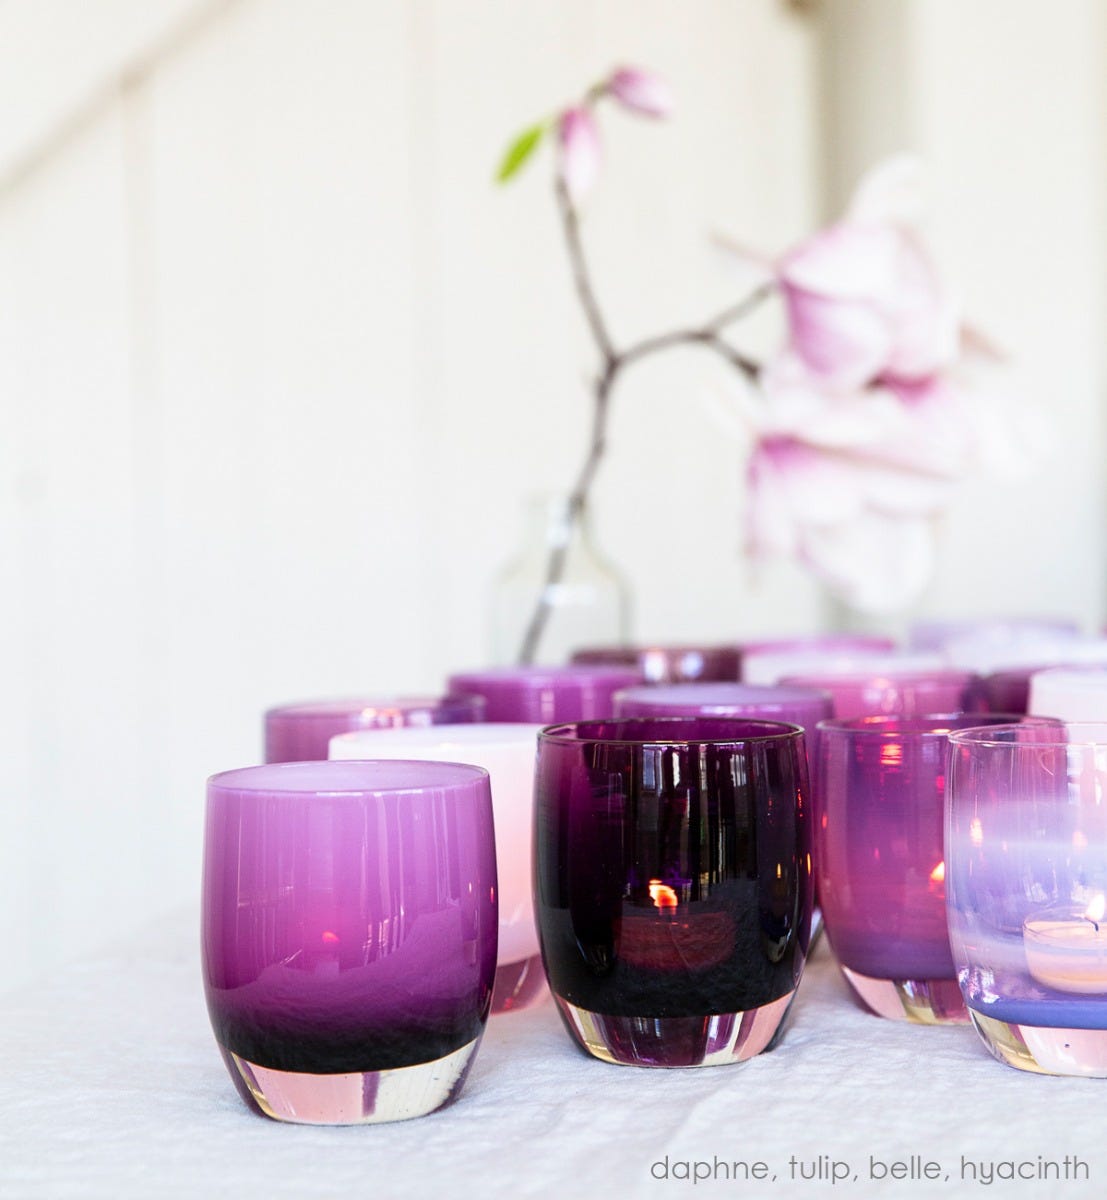 daphne bright purple with white interior, hand-blown glass votive candle holder. Paired with tulip, belle, and hyacinth.